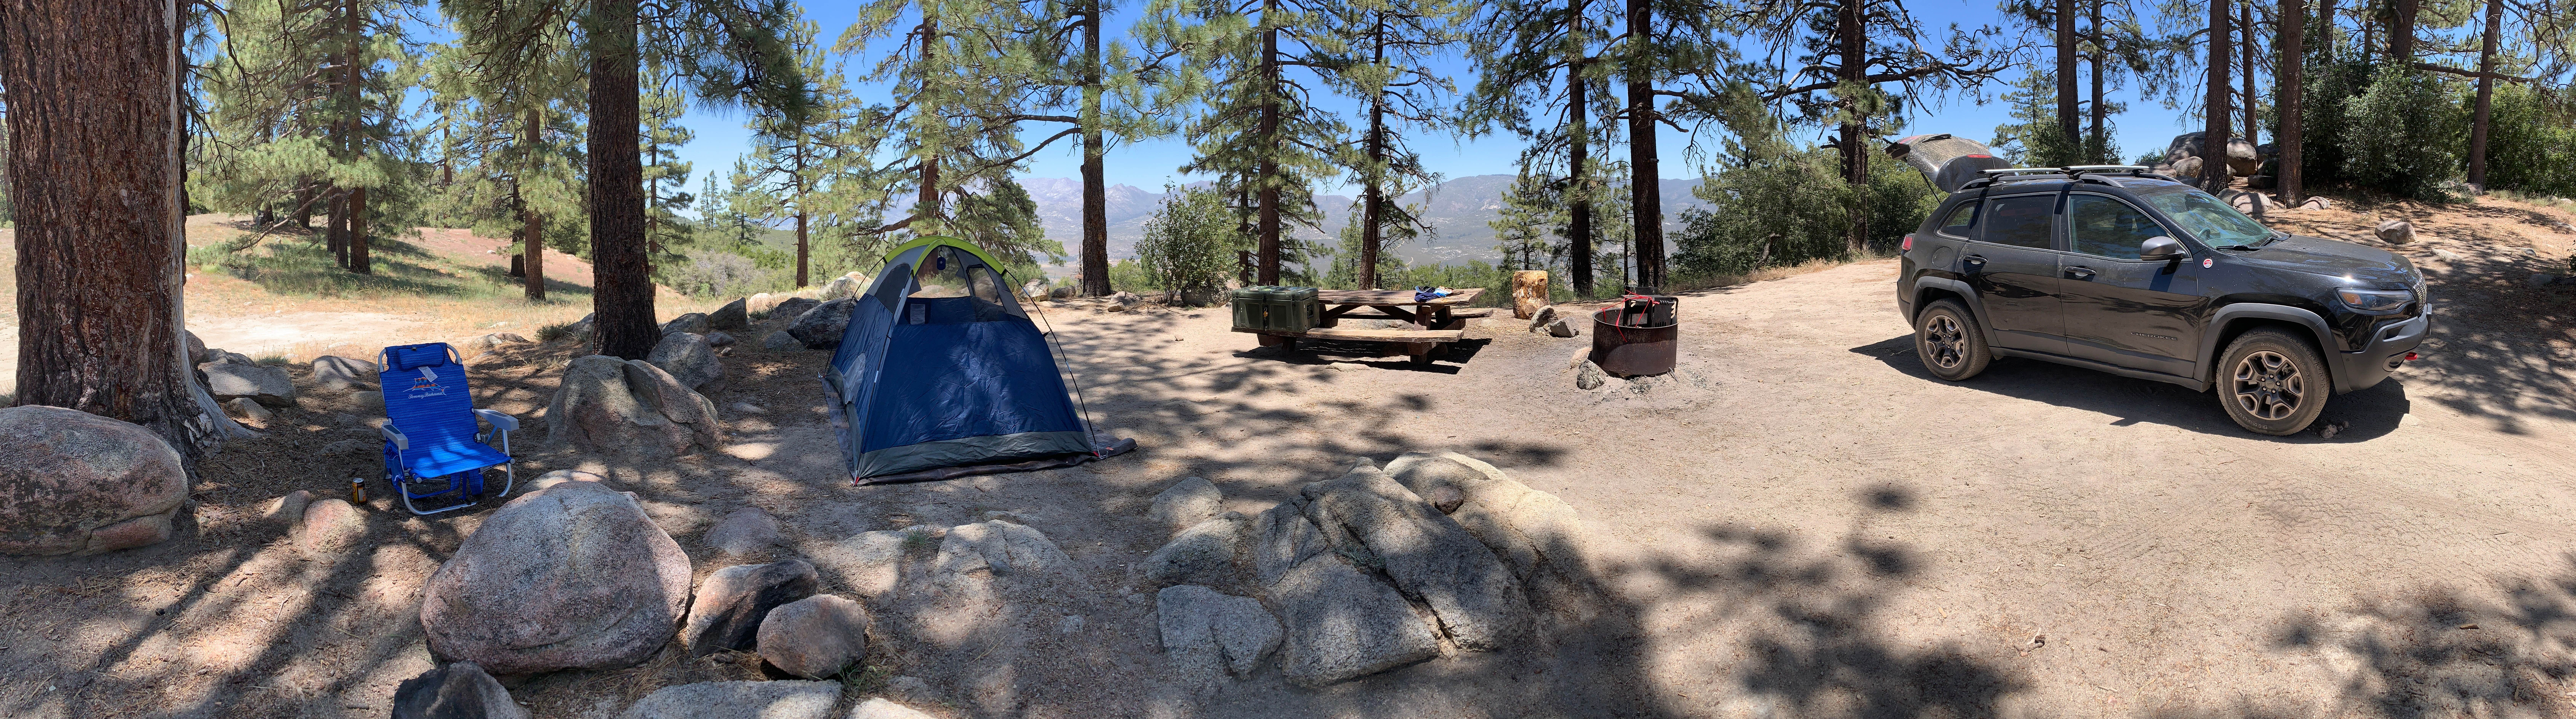 Camper submitted image from Tool Box Springs - Yellow Post Campground - 1